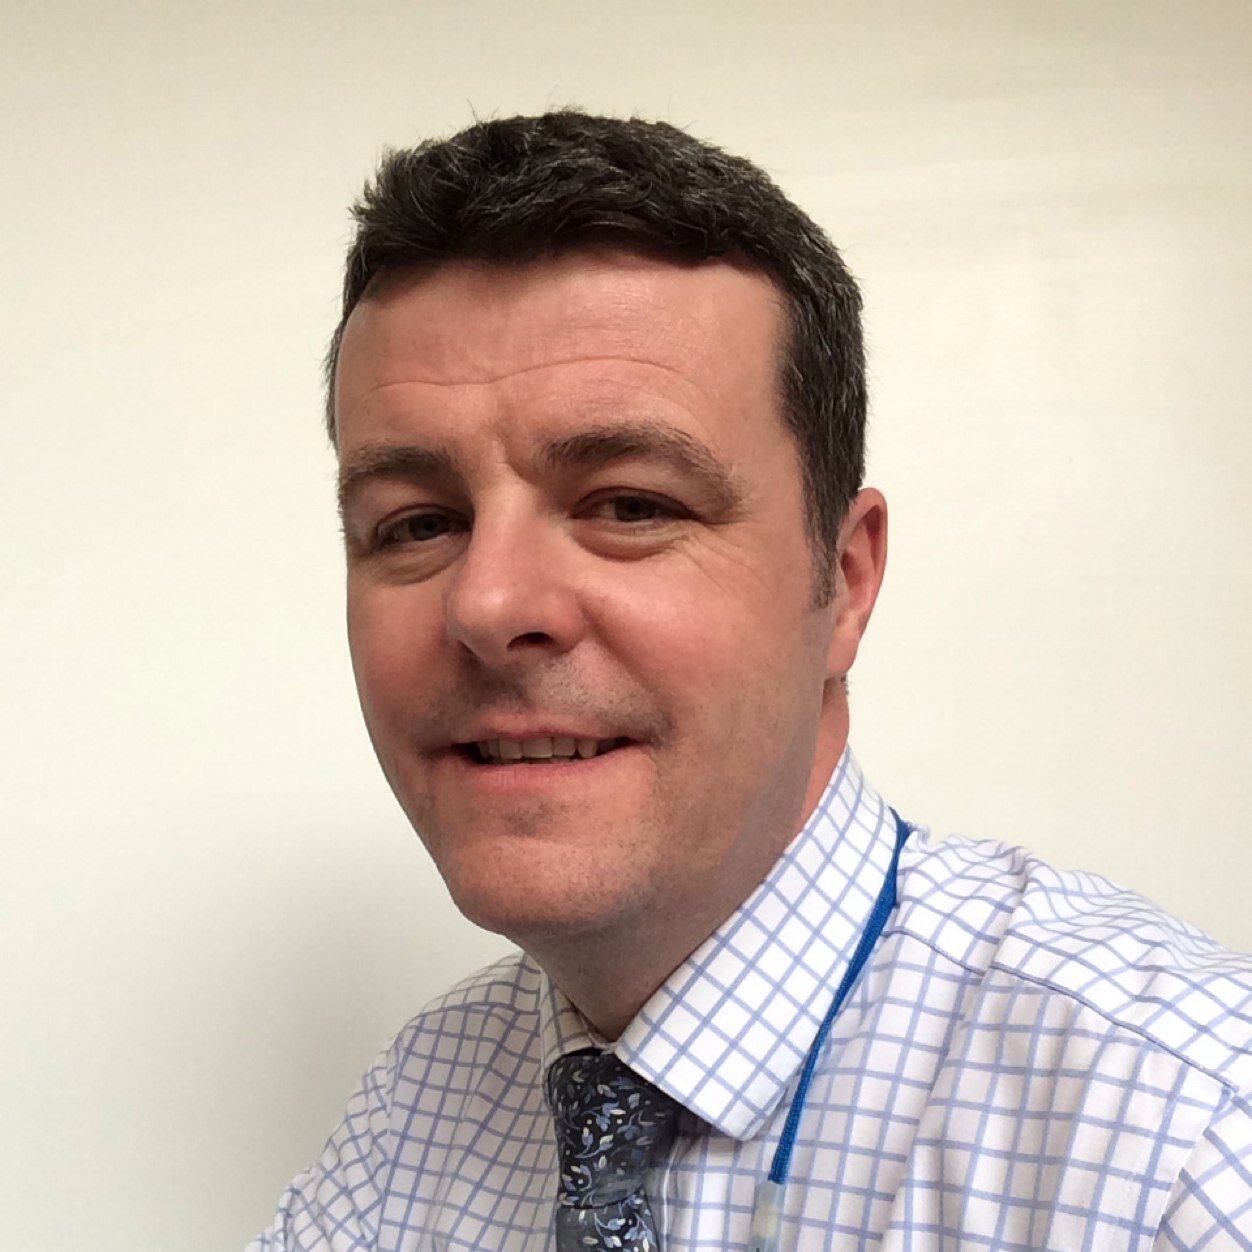 Managing Director of Newsquest North